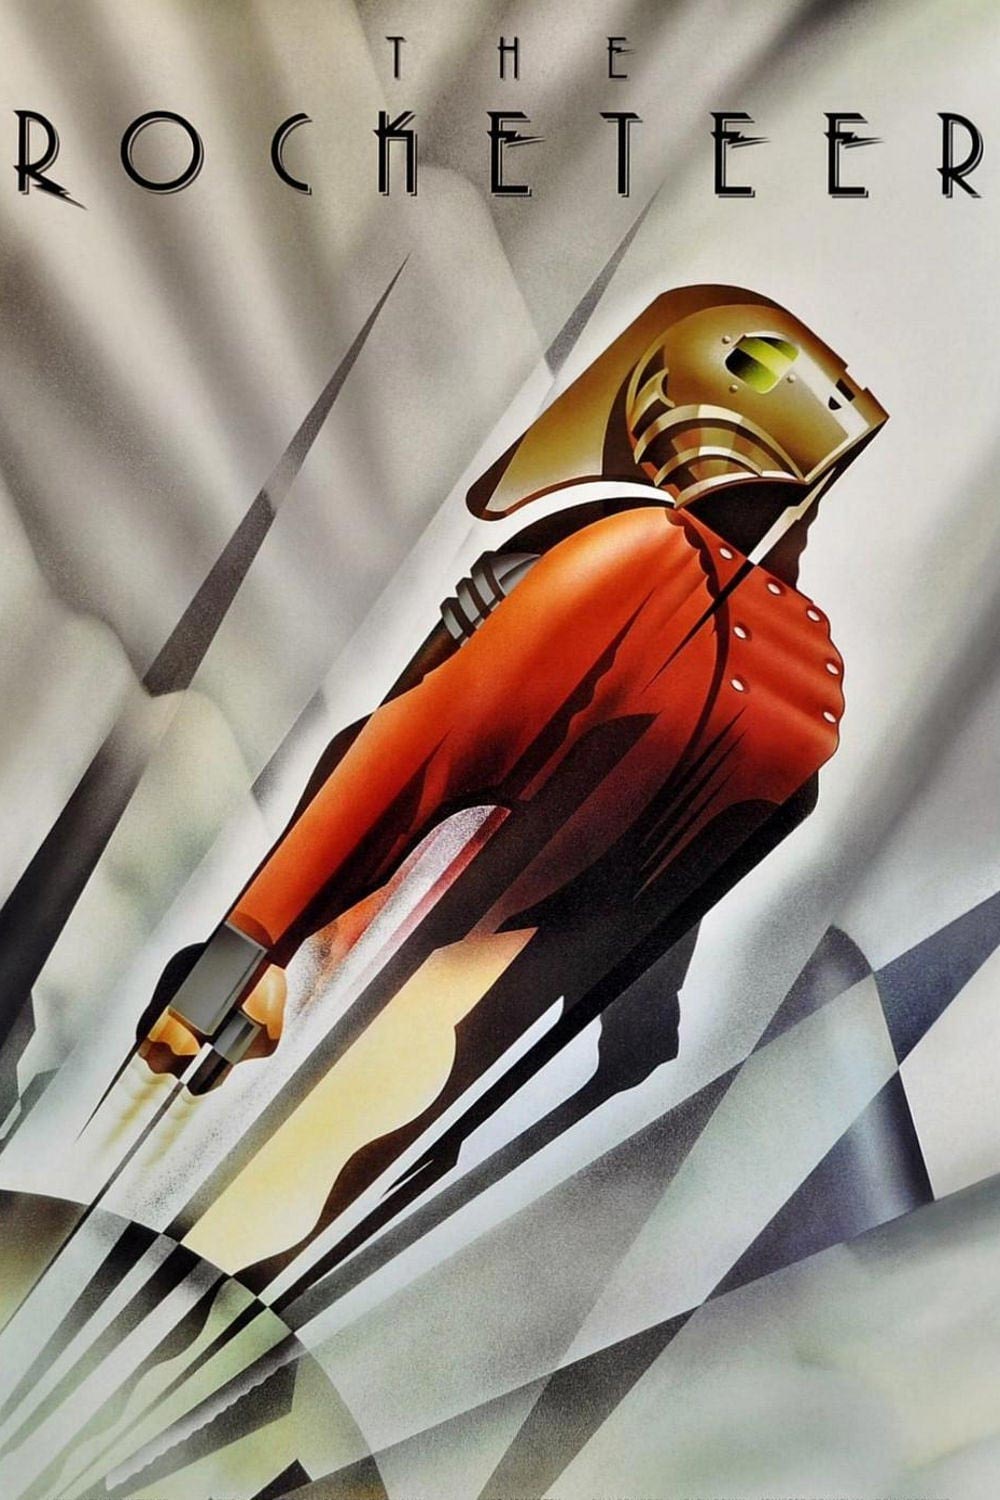 The Rocketeer (1991) Poster